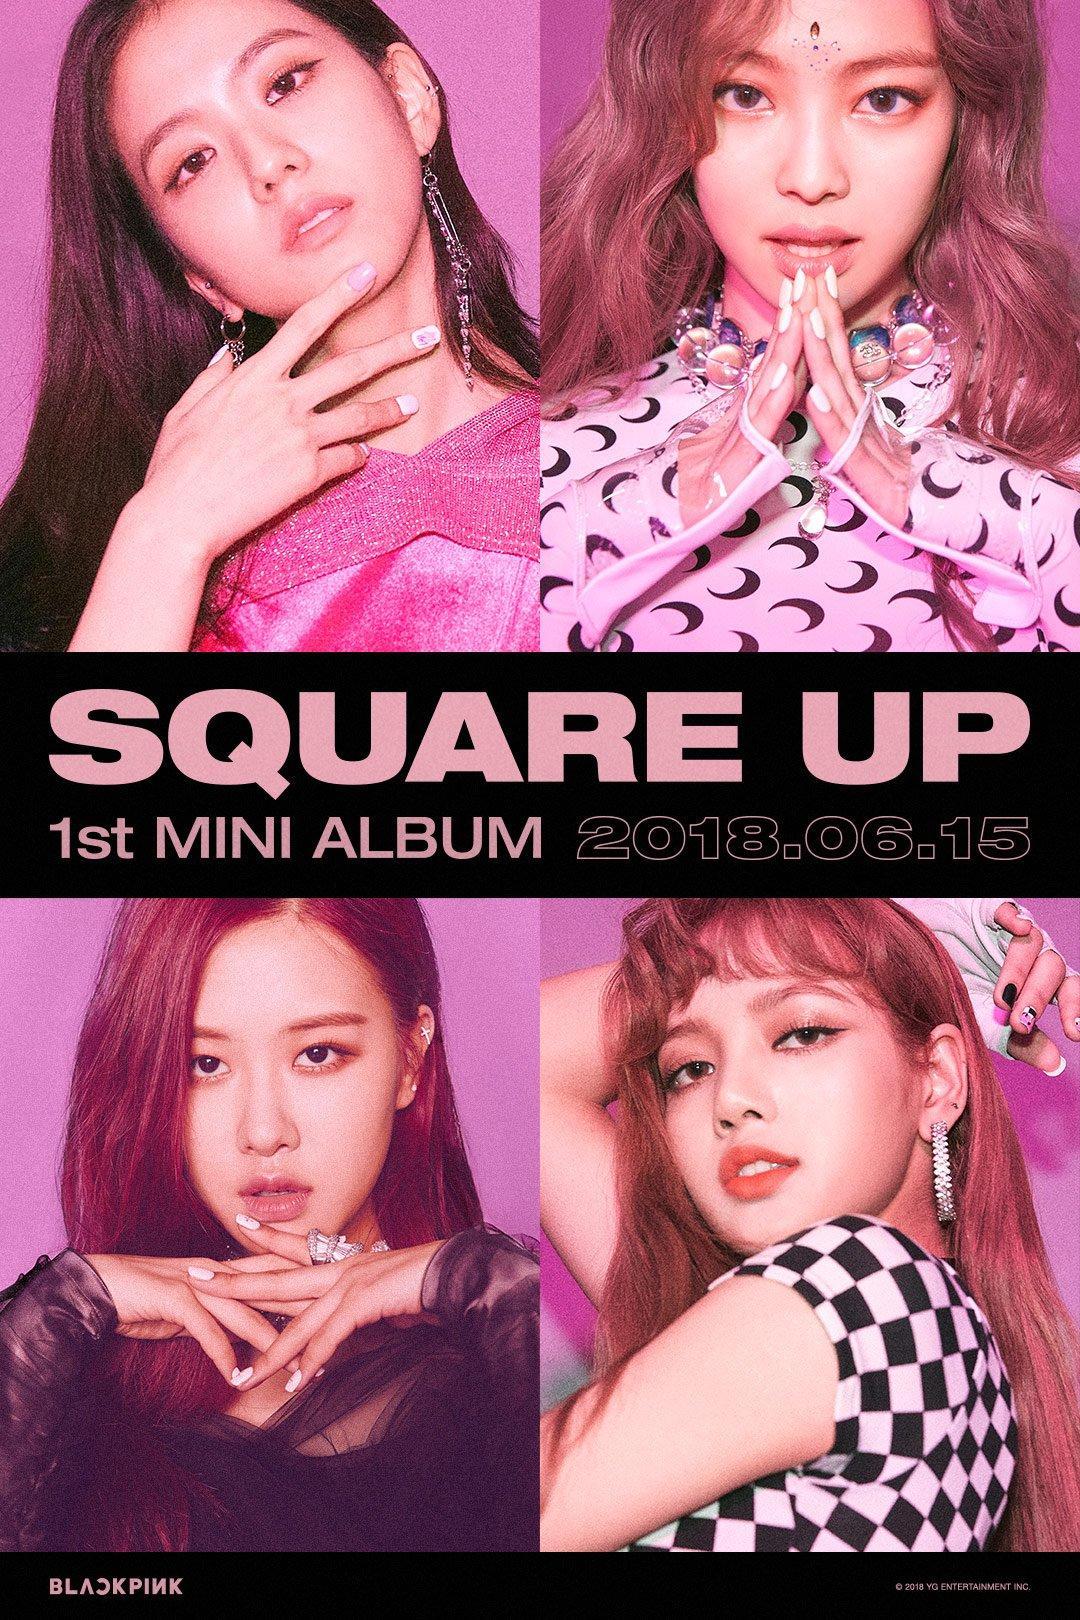  Blackpink  Wallpaper  UHD 2021 for Android APK  Download